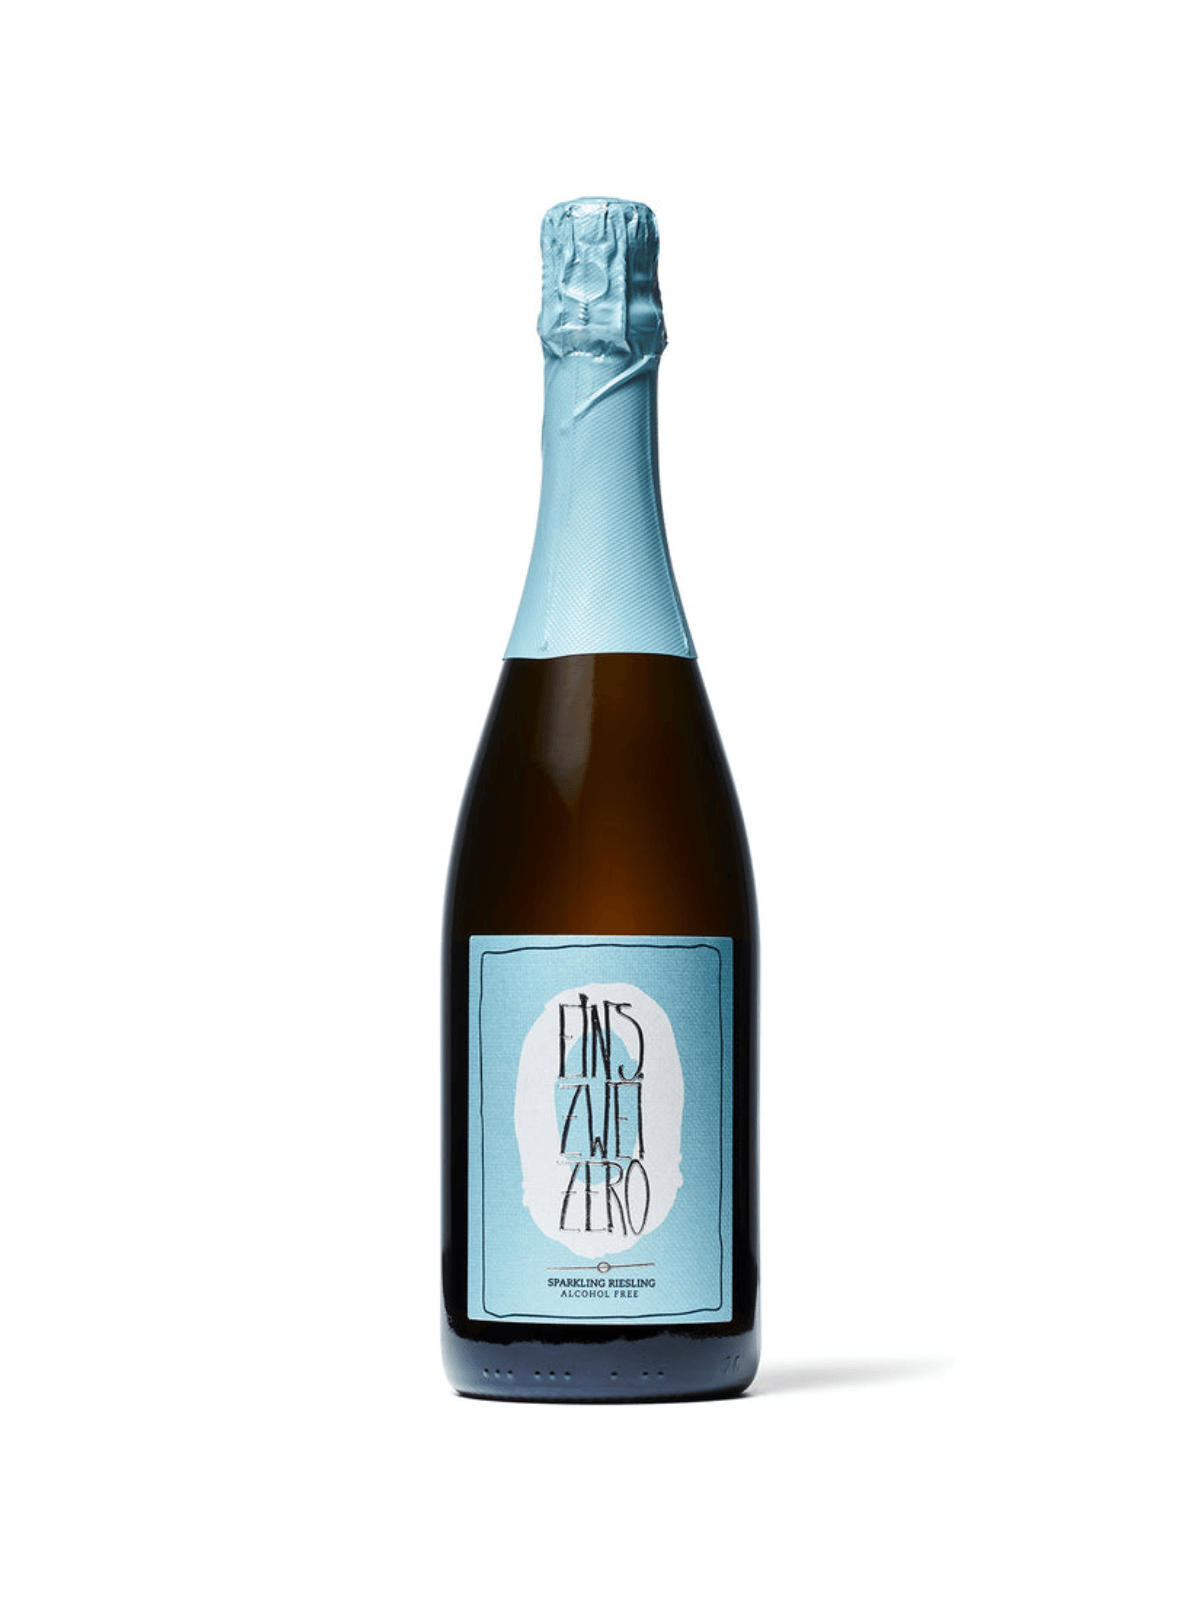 a sparkling wine bottle on a white background with a baby blue label and cork area with a white 0 and silver writing.